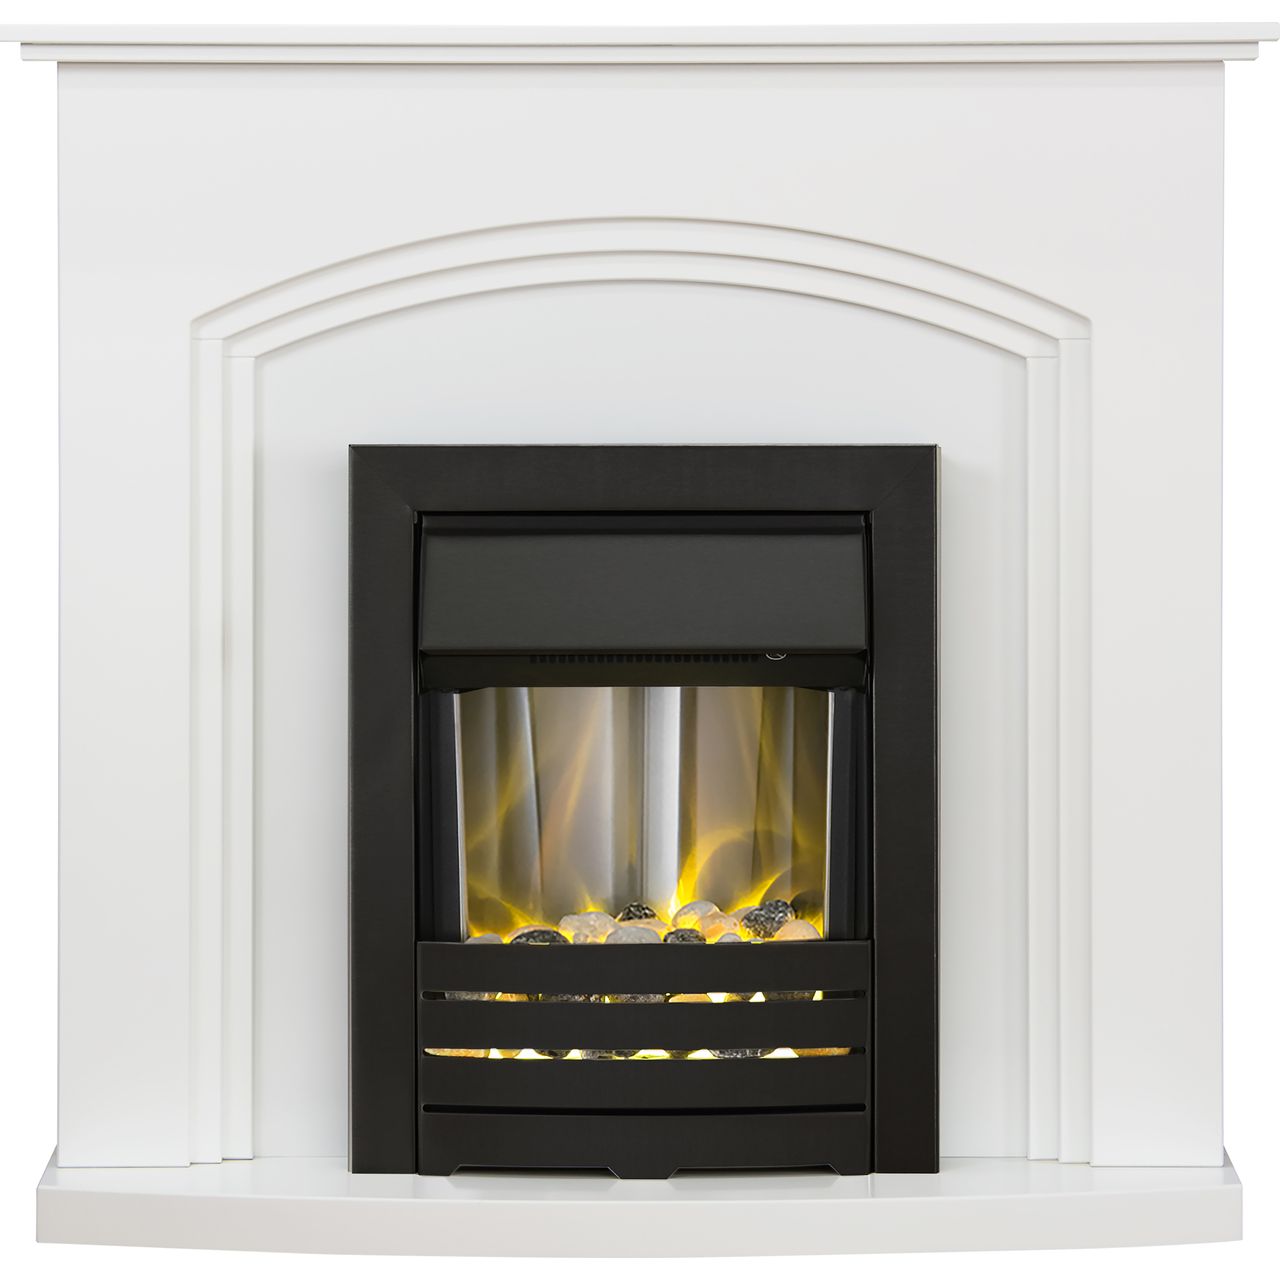 Adam Fires Truro Suite with Helios Electric Fire 21882 Pebble Bed Suite And Surround Fireplace Review